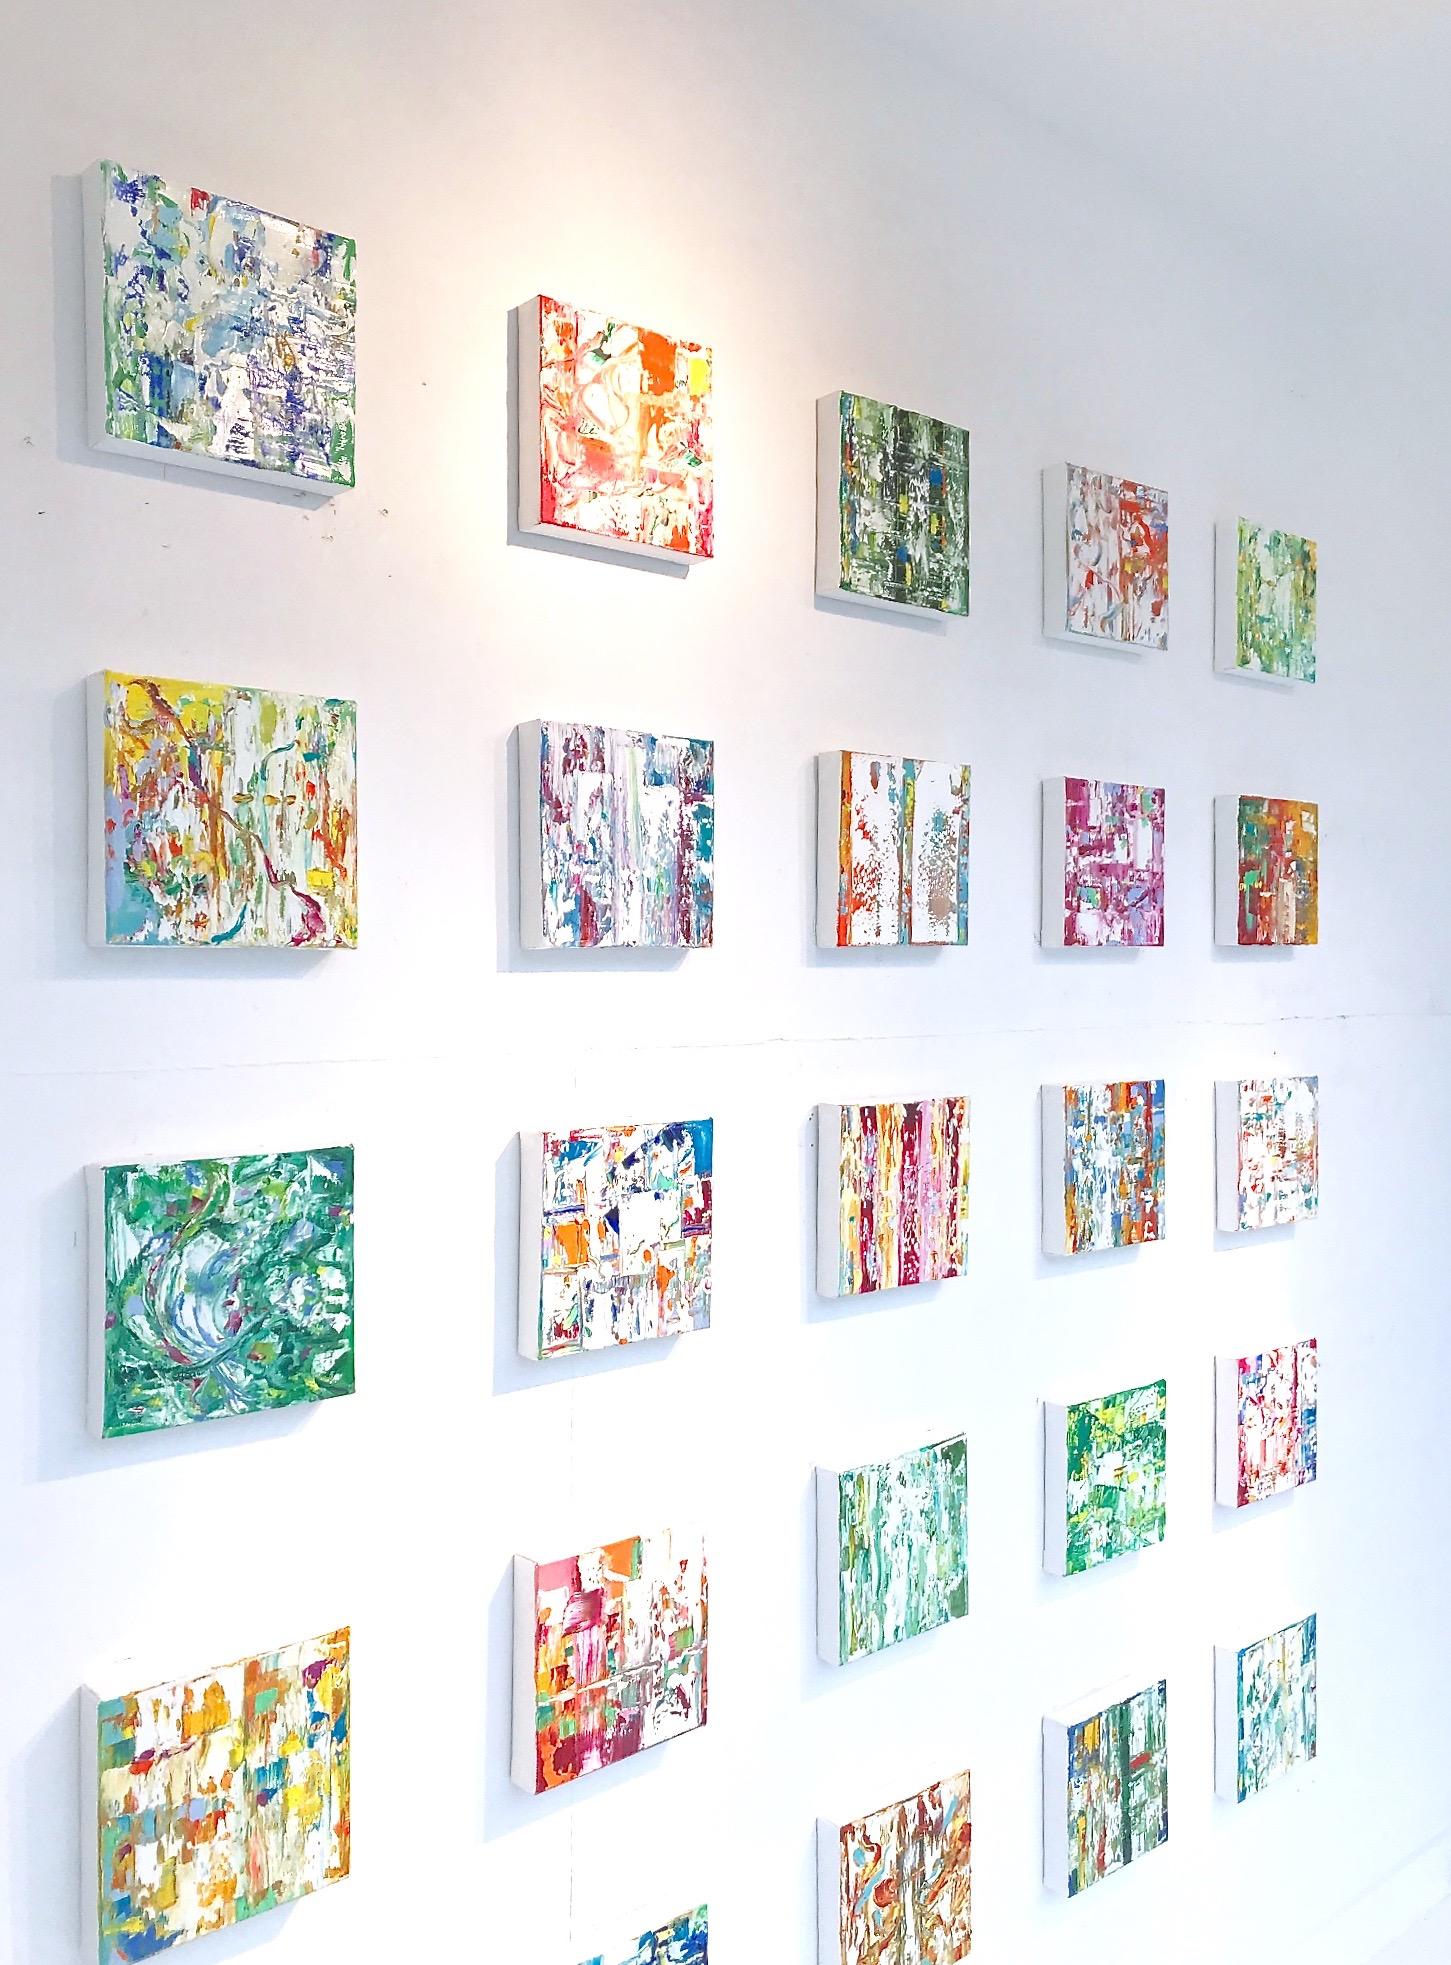 
NOTE:  The installation view shown here is of a previous installation of 25 paintings. Not all of these works are still available but if a large installation of paintings is of interested (we are suggesting 15 - 3 rows of 5 each -  but that number